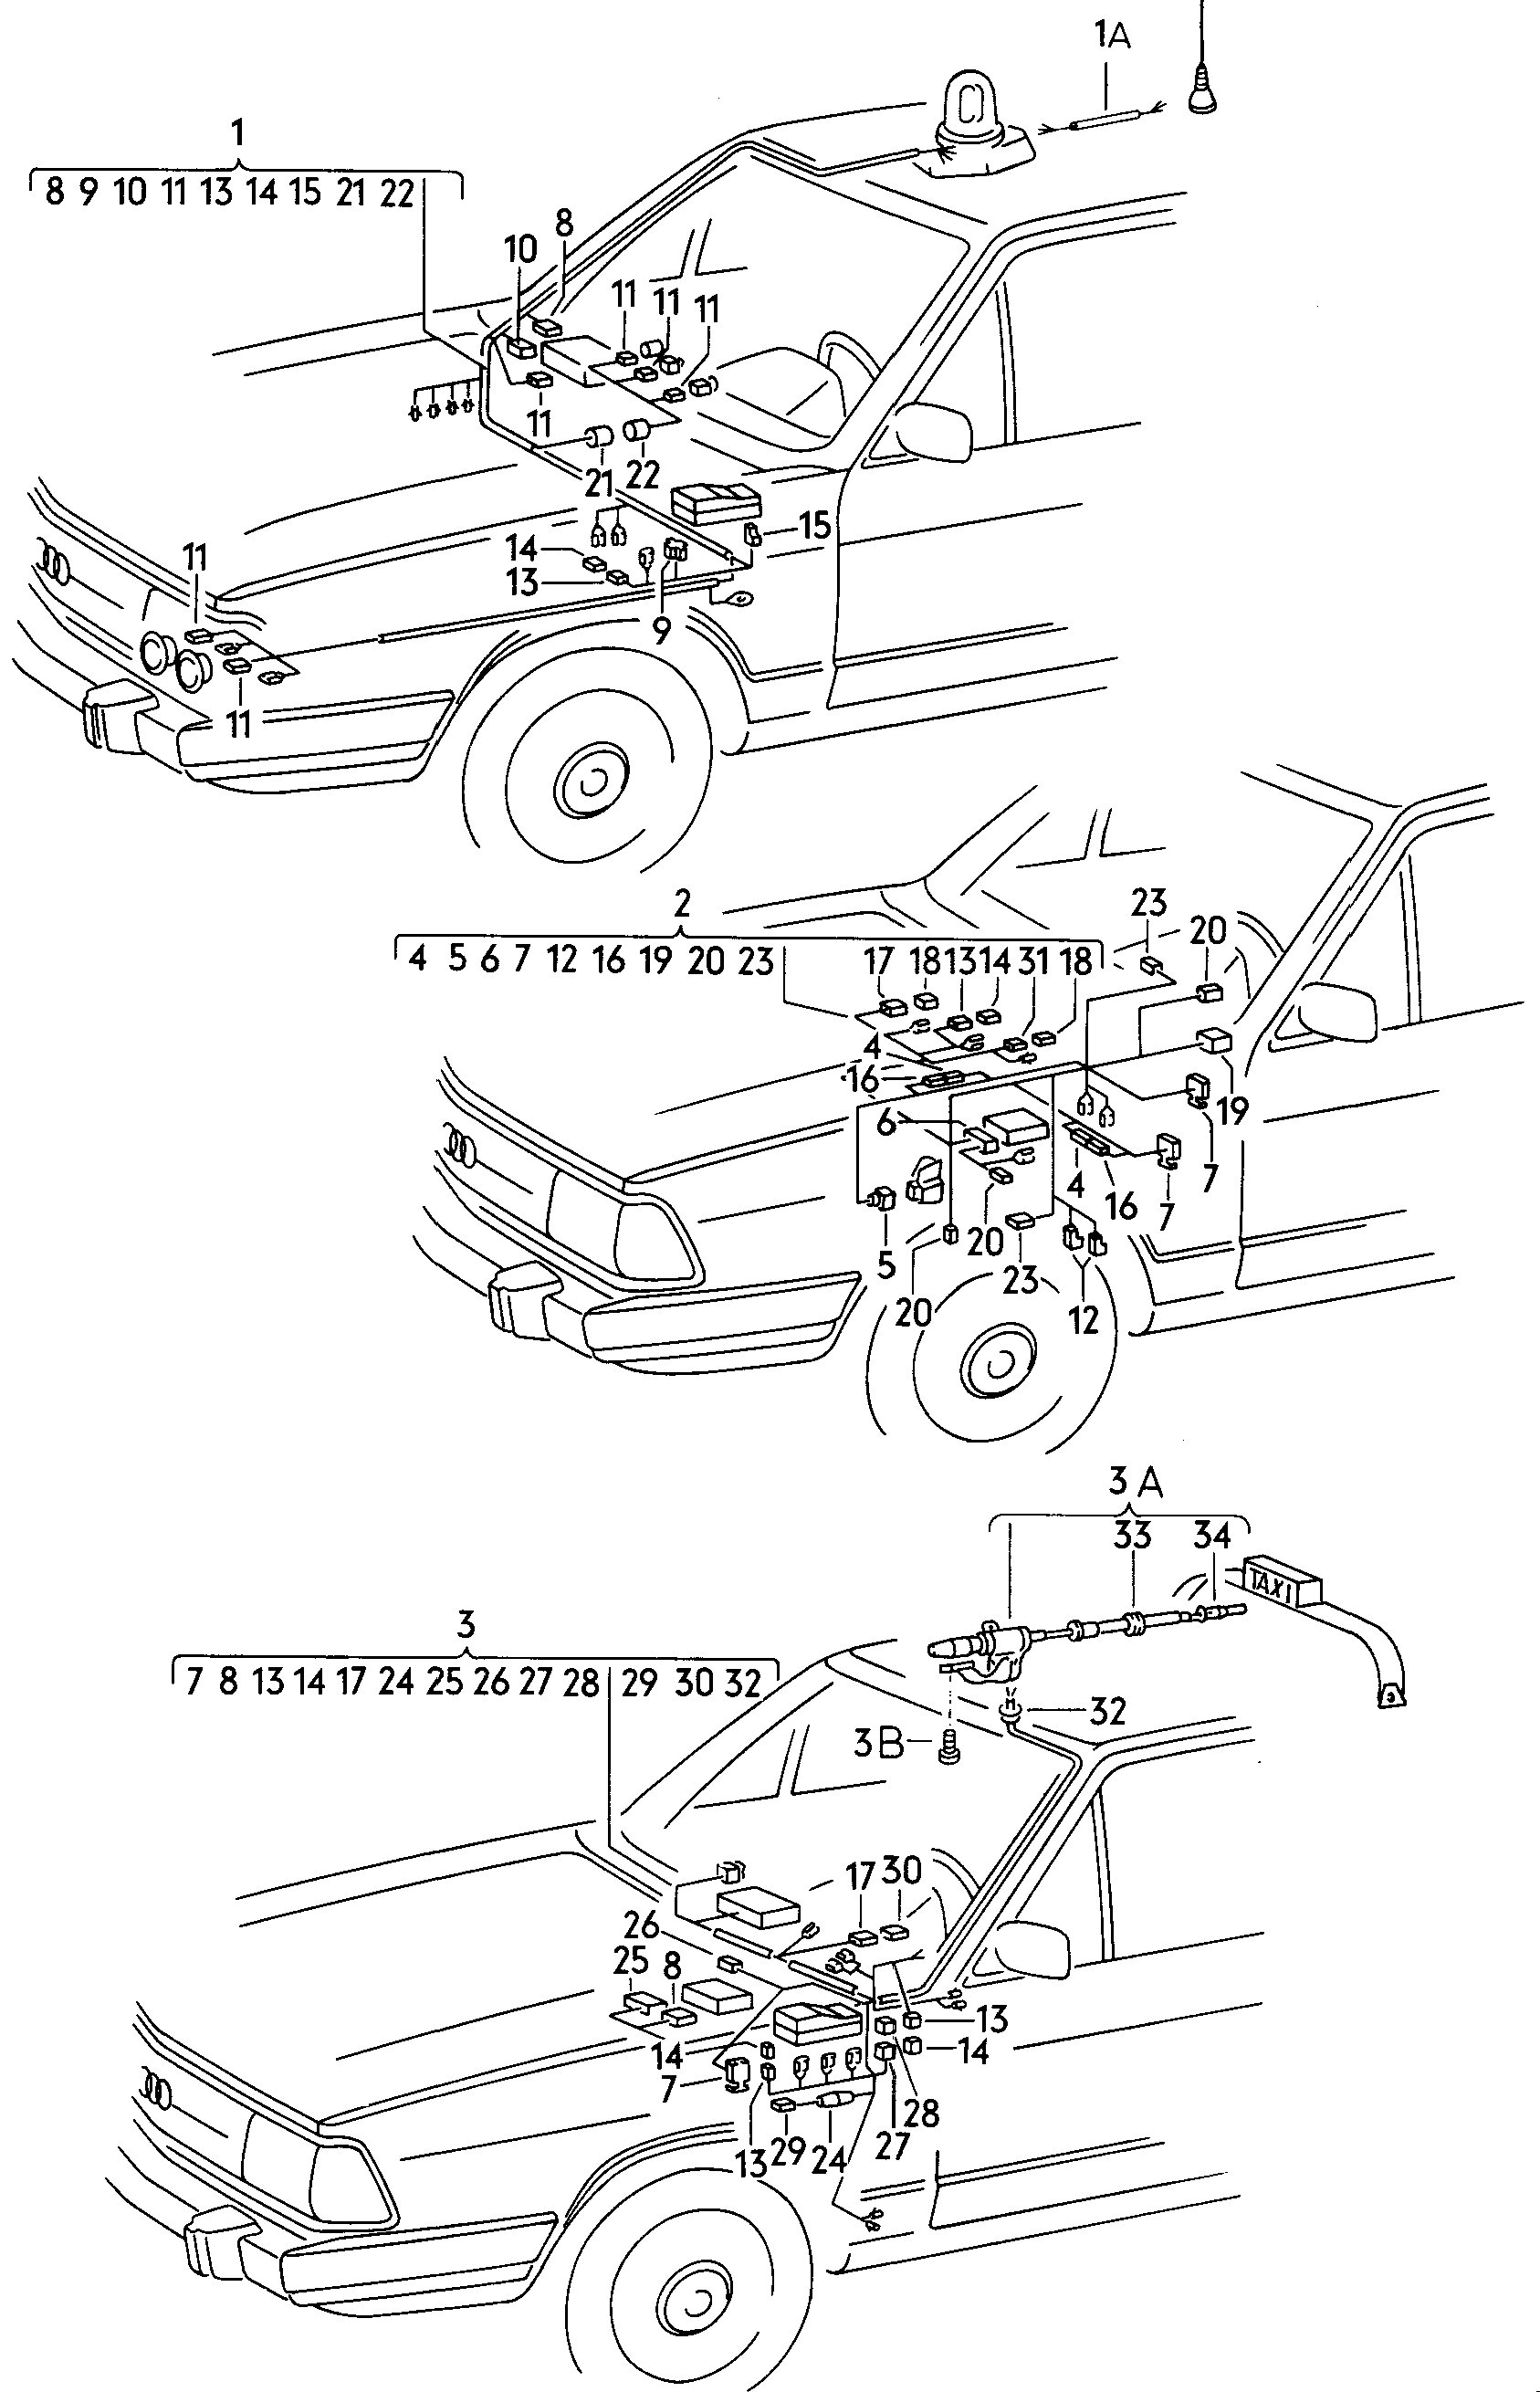 Wiring loomsfor models with<br>cruise control system  - Audi 100/Avant - a100